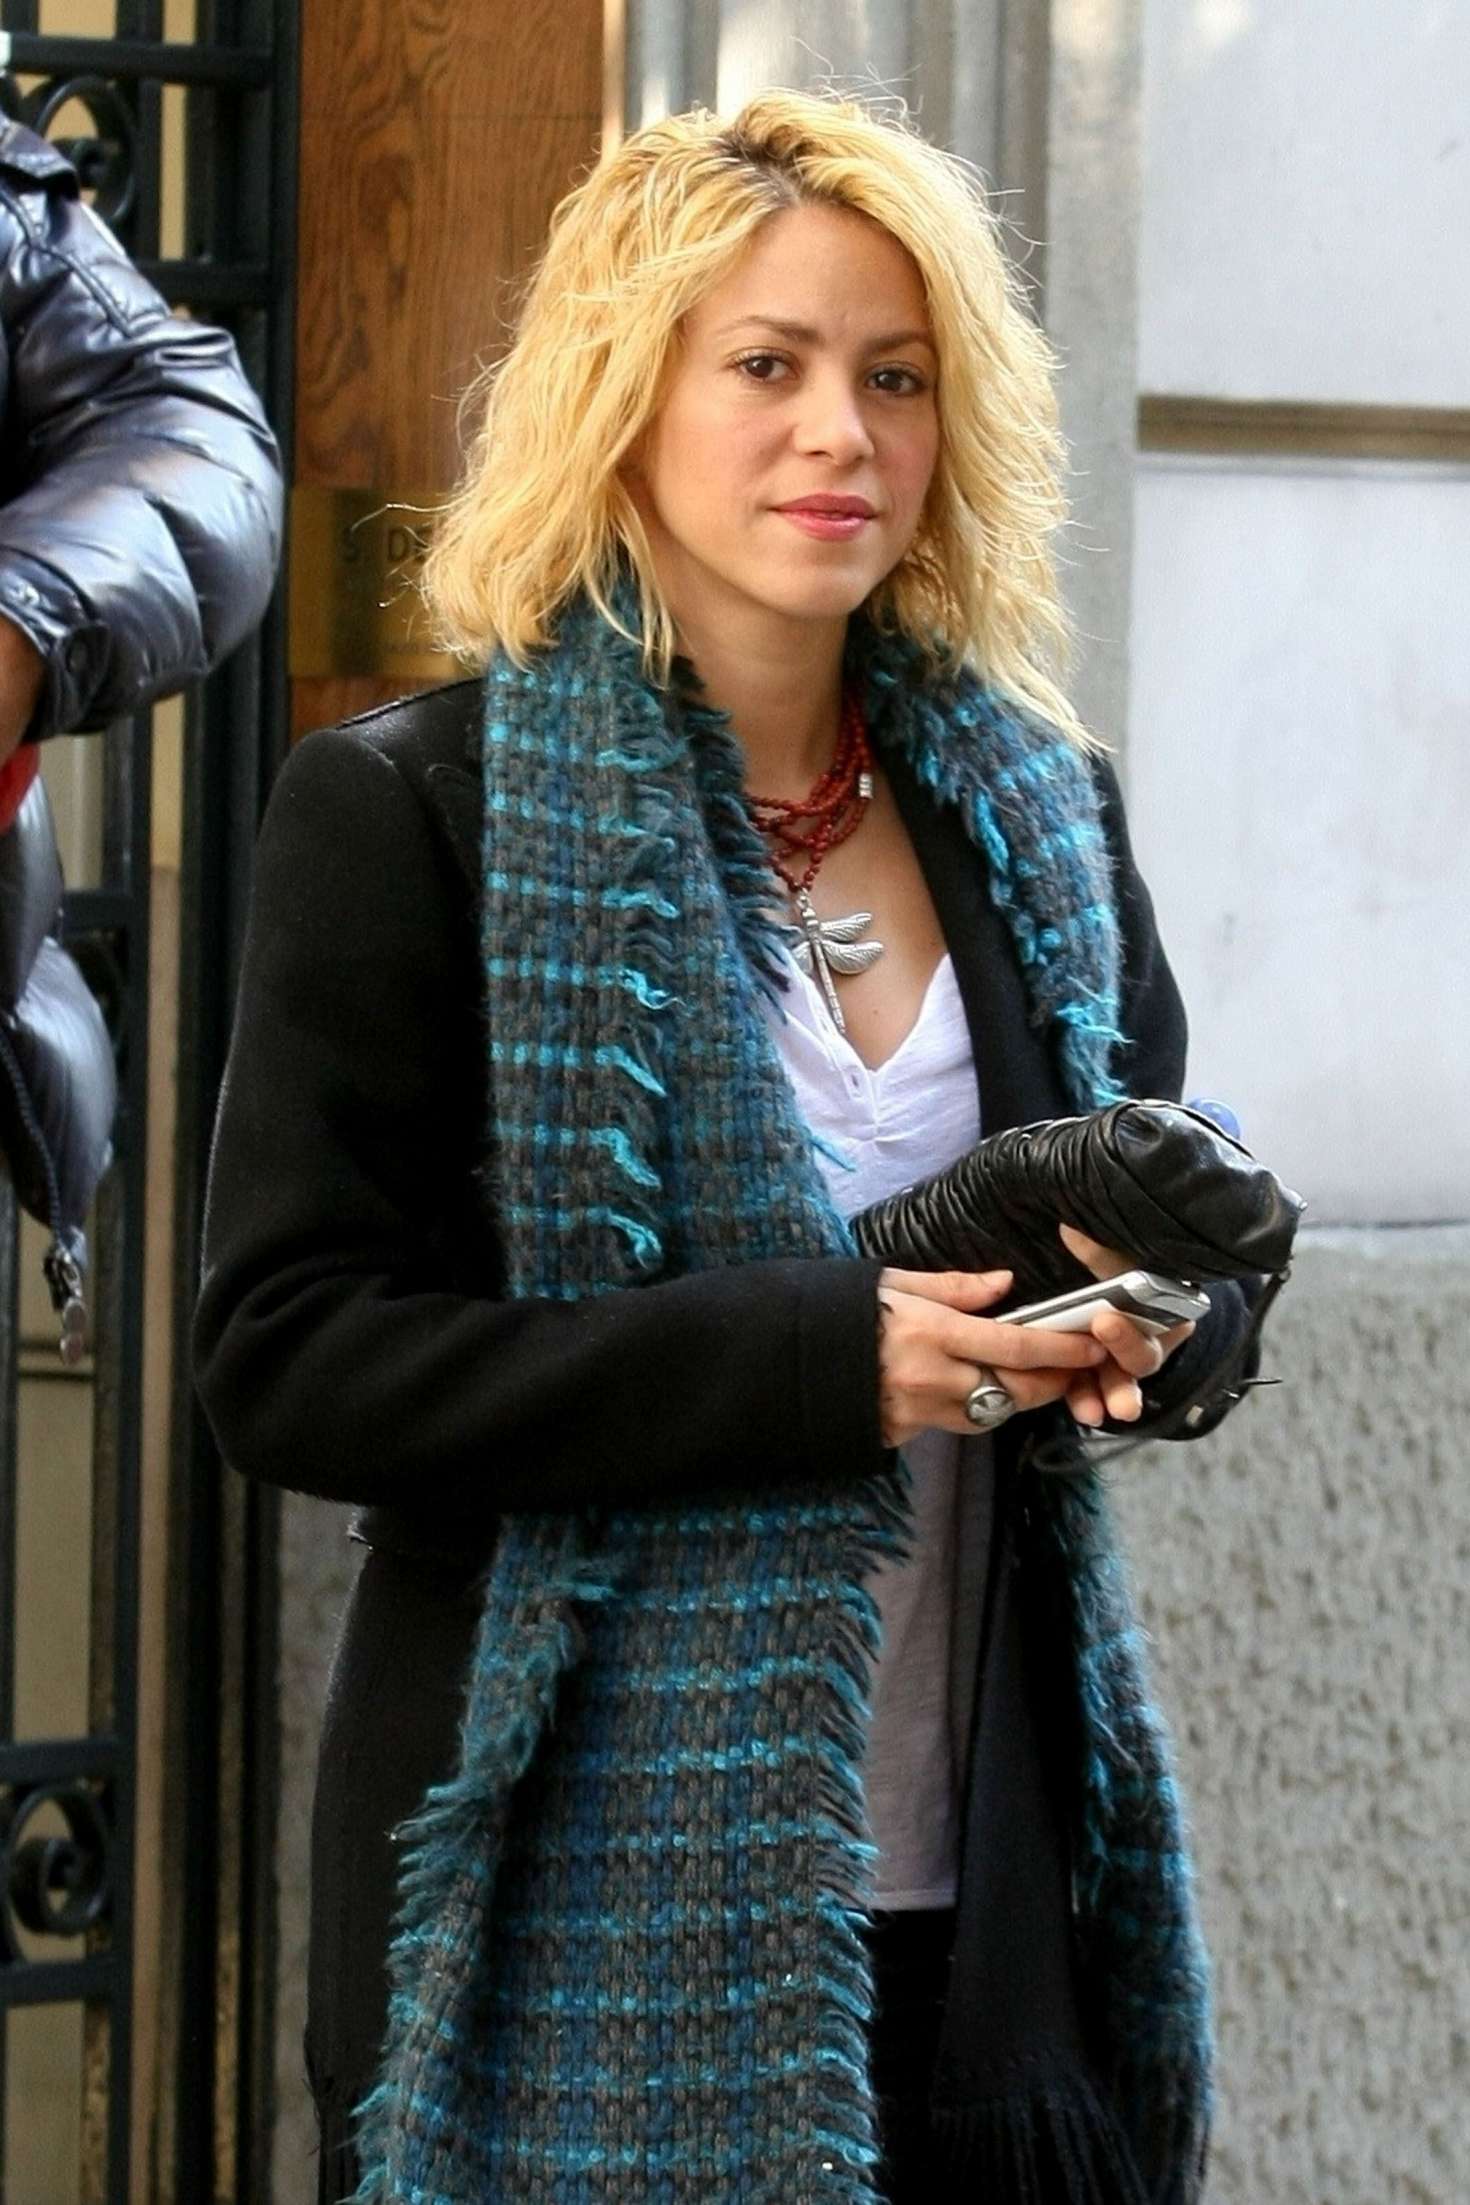 Shakira - Out in Barcelona